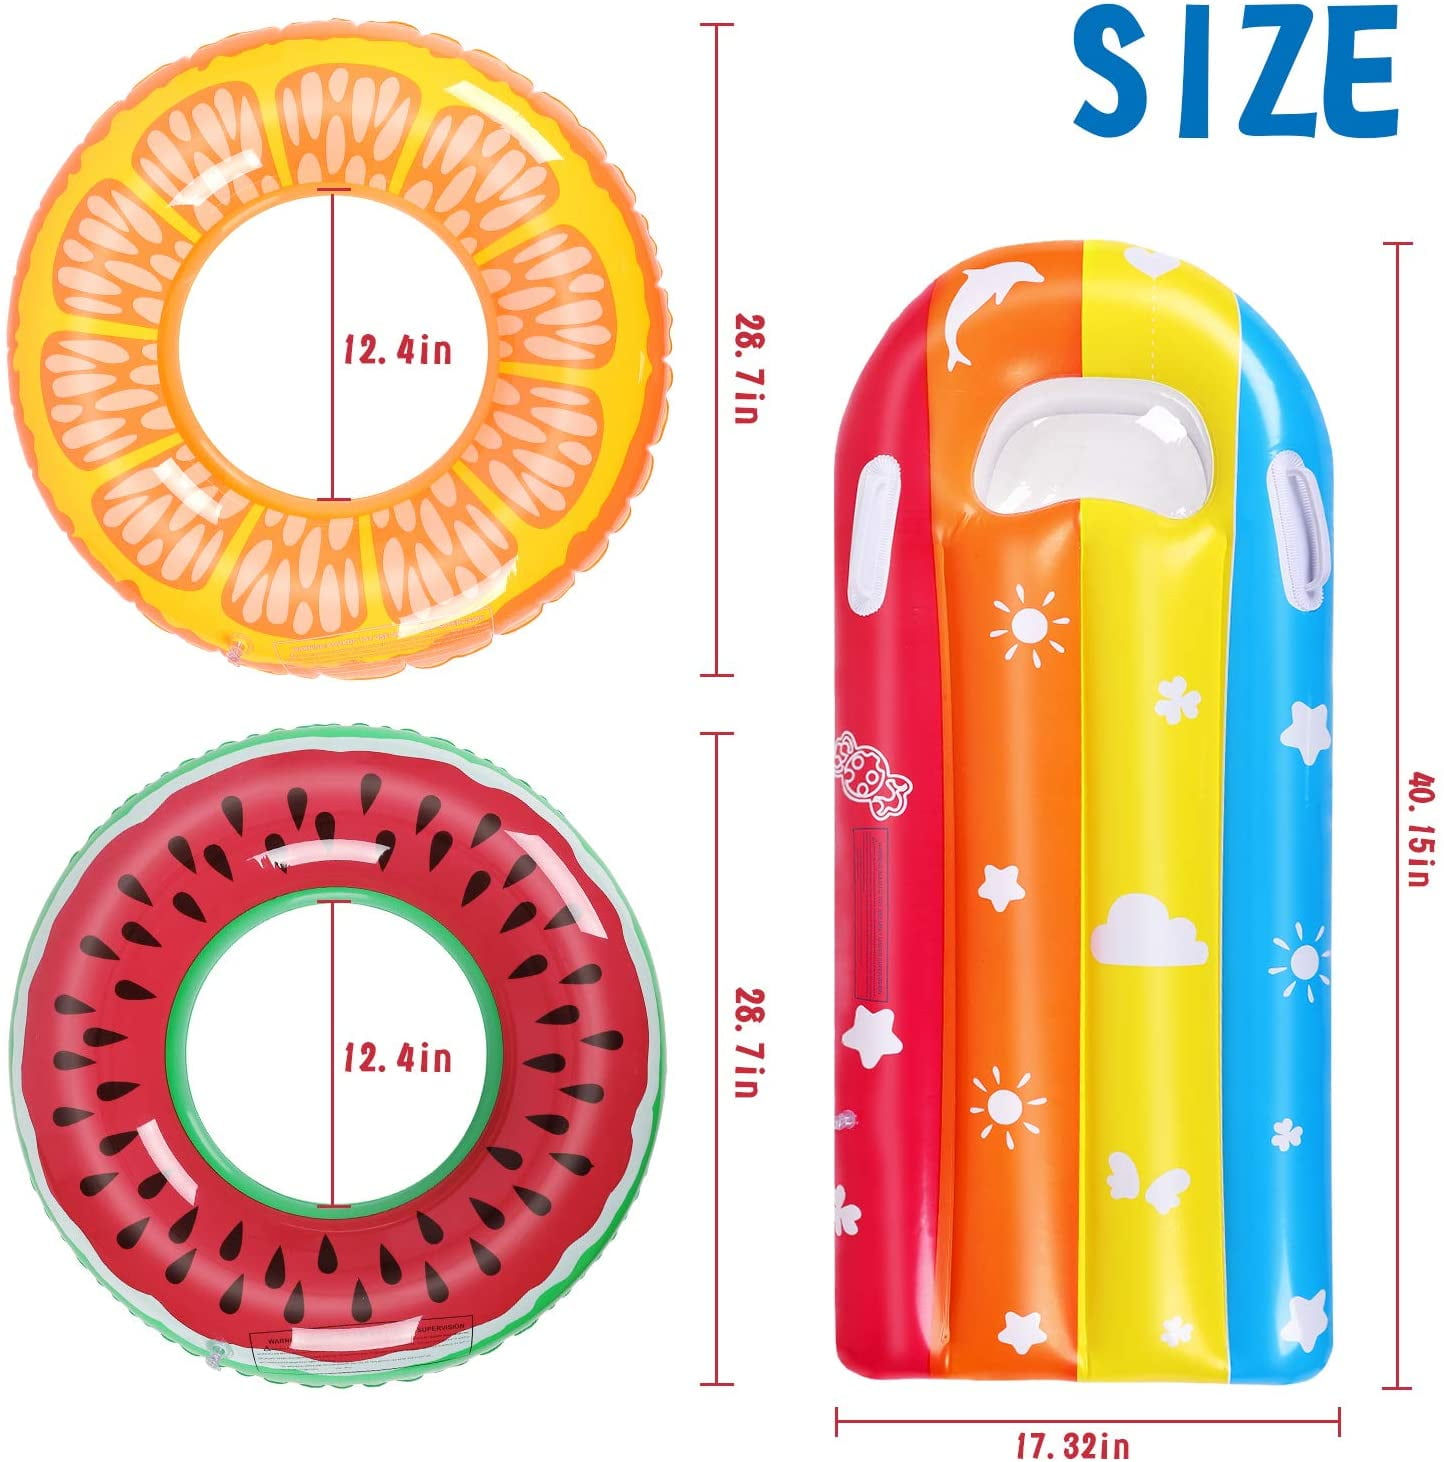 Auney 3 Pack Pool Floats for Kids Inflatable Swimming Rings Fruit Pool Float Summer Beach Water Float Party Toys River Raft Lounge Swim Inner Tube 